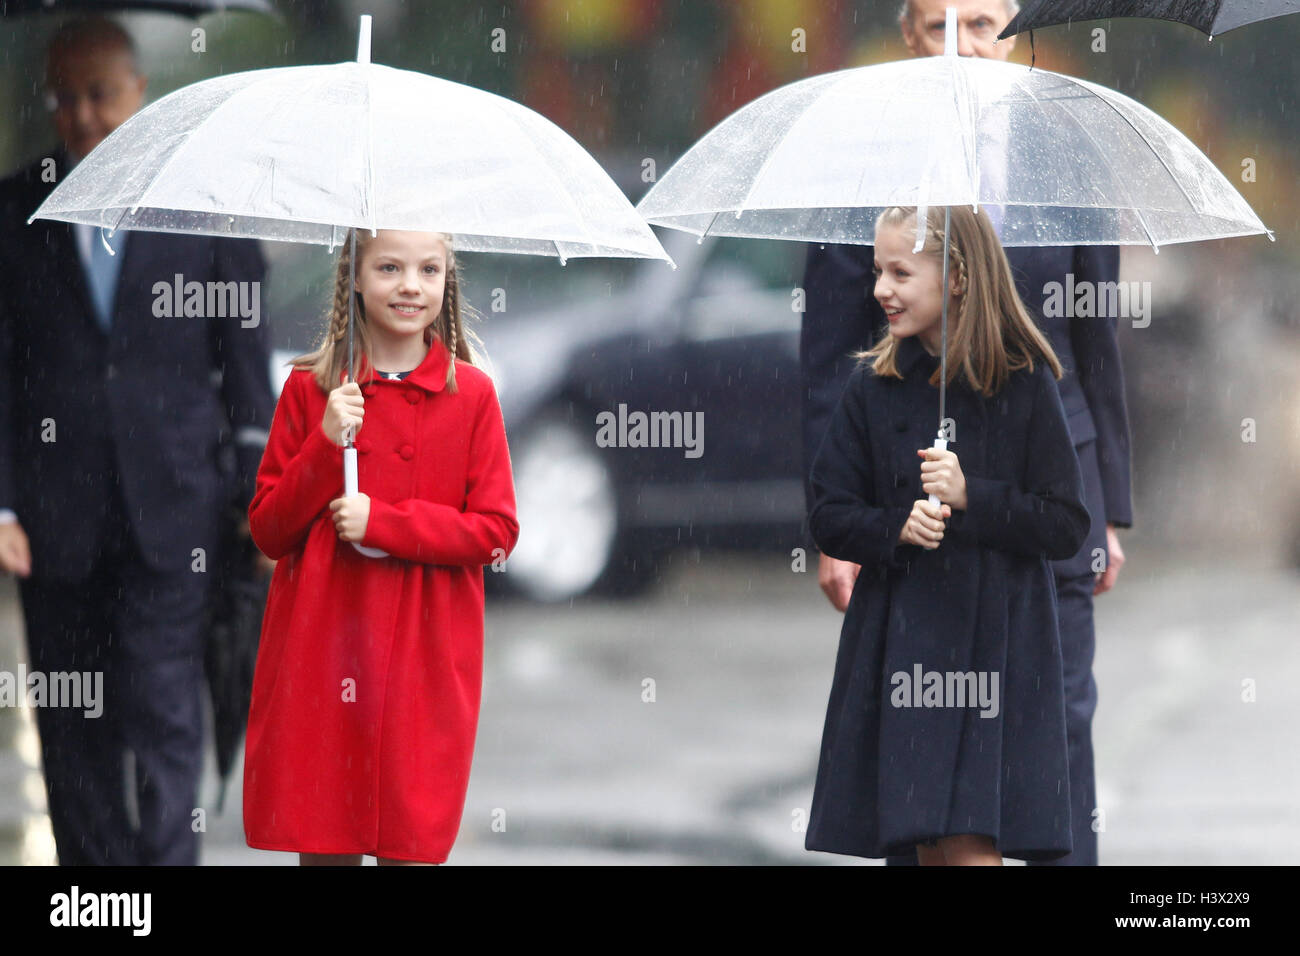 Madrid, Spain. 12th October, 2016. Queen Letizia, King Felipe, Princess Sofía and Princess Leonor attend the military Parade for the National day at Neptuno Square in Madrid, Spain. October 12, 2016. Credit:  MediaPunch Inc/Alamy Live News Stock Photo